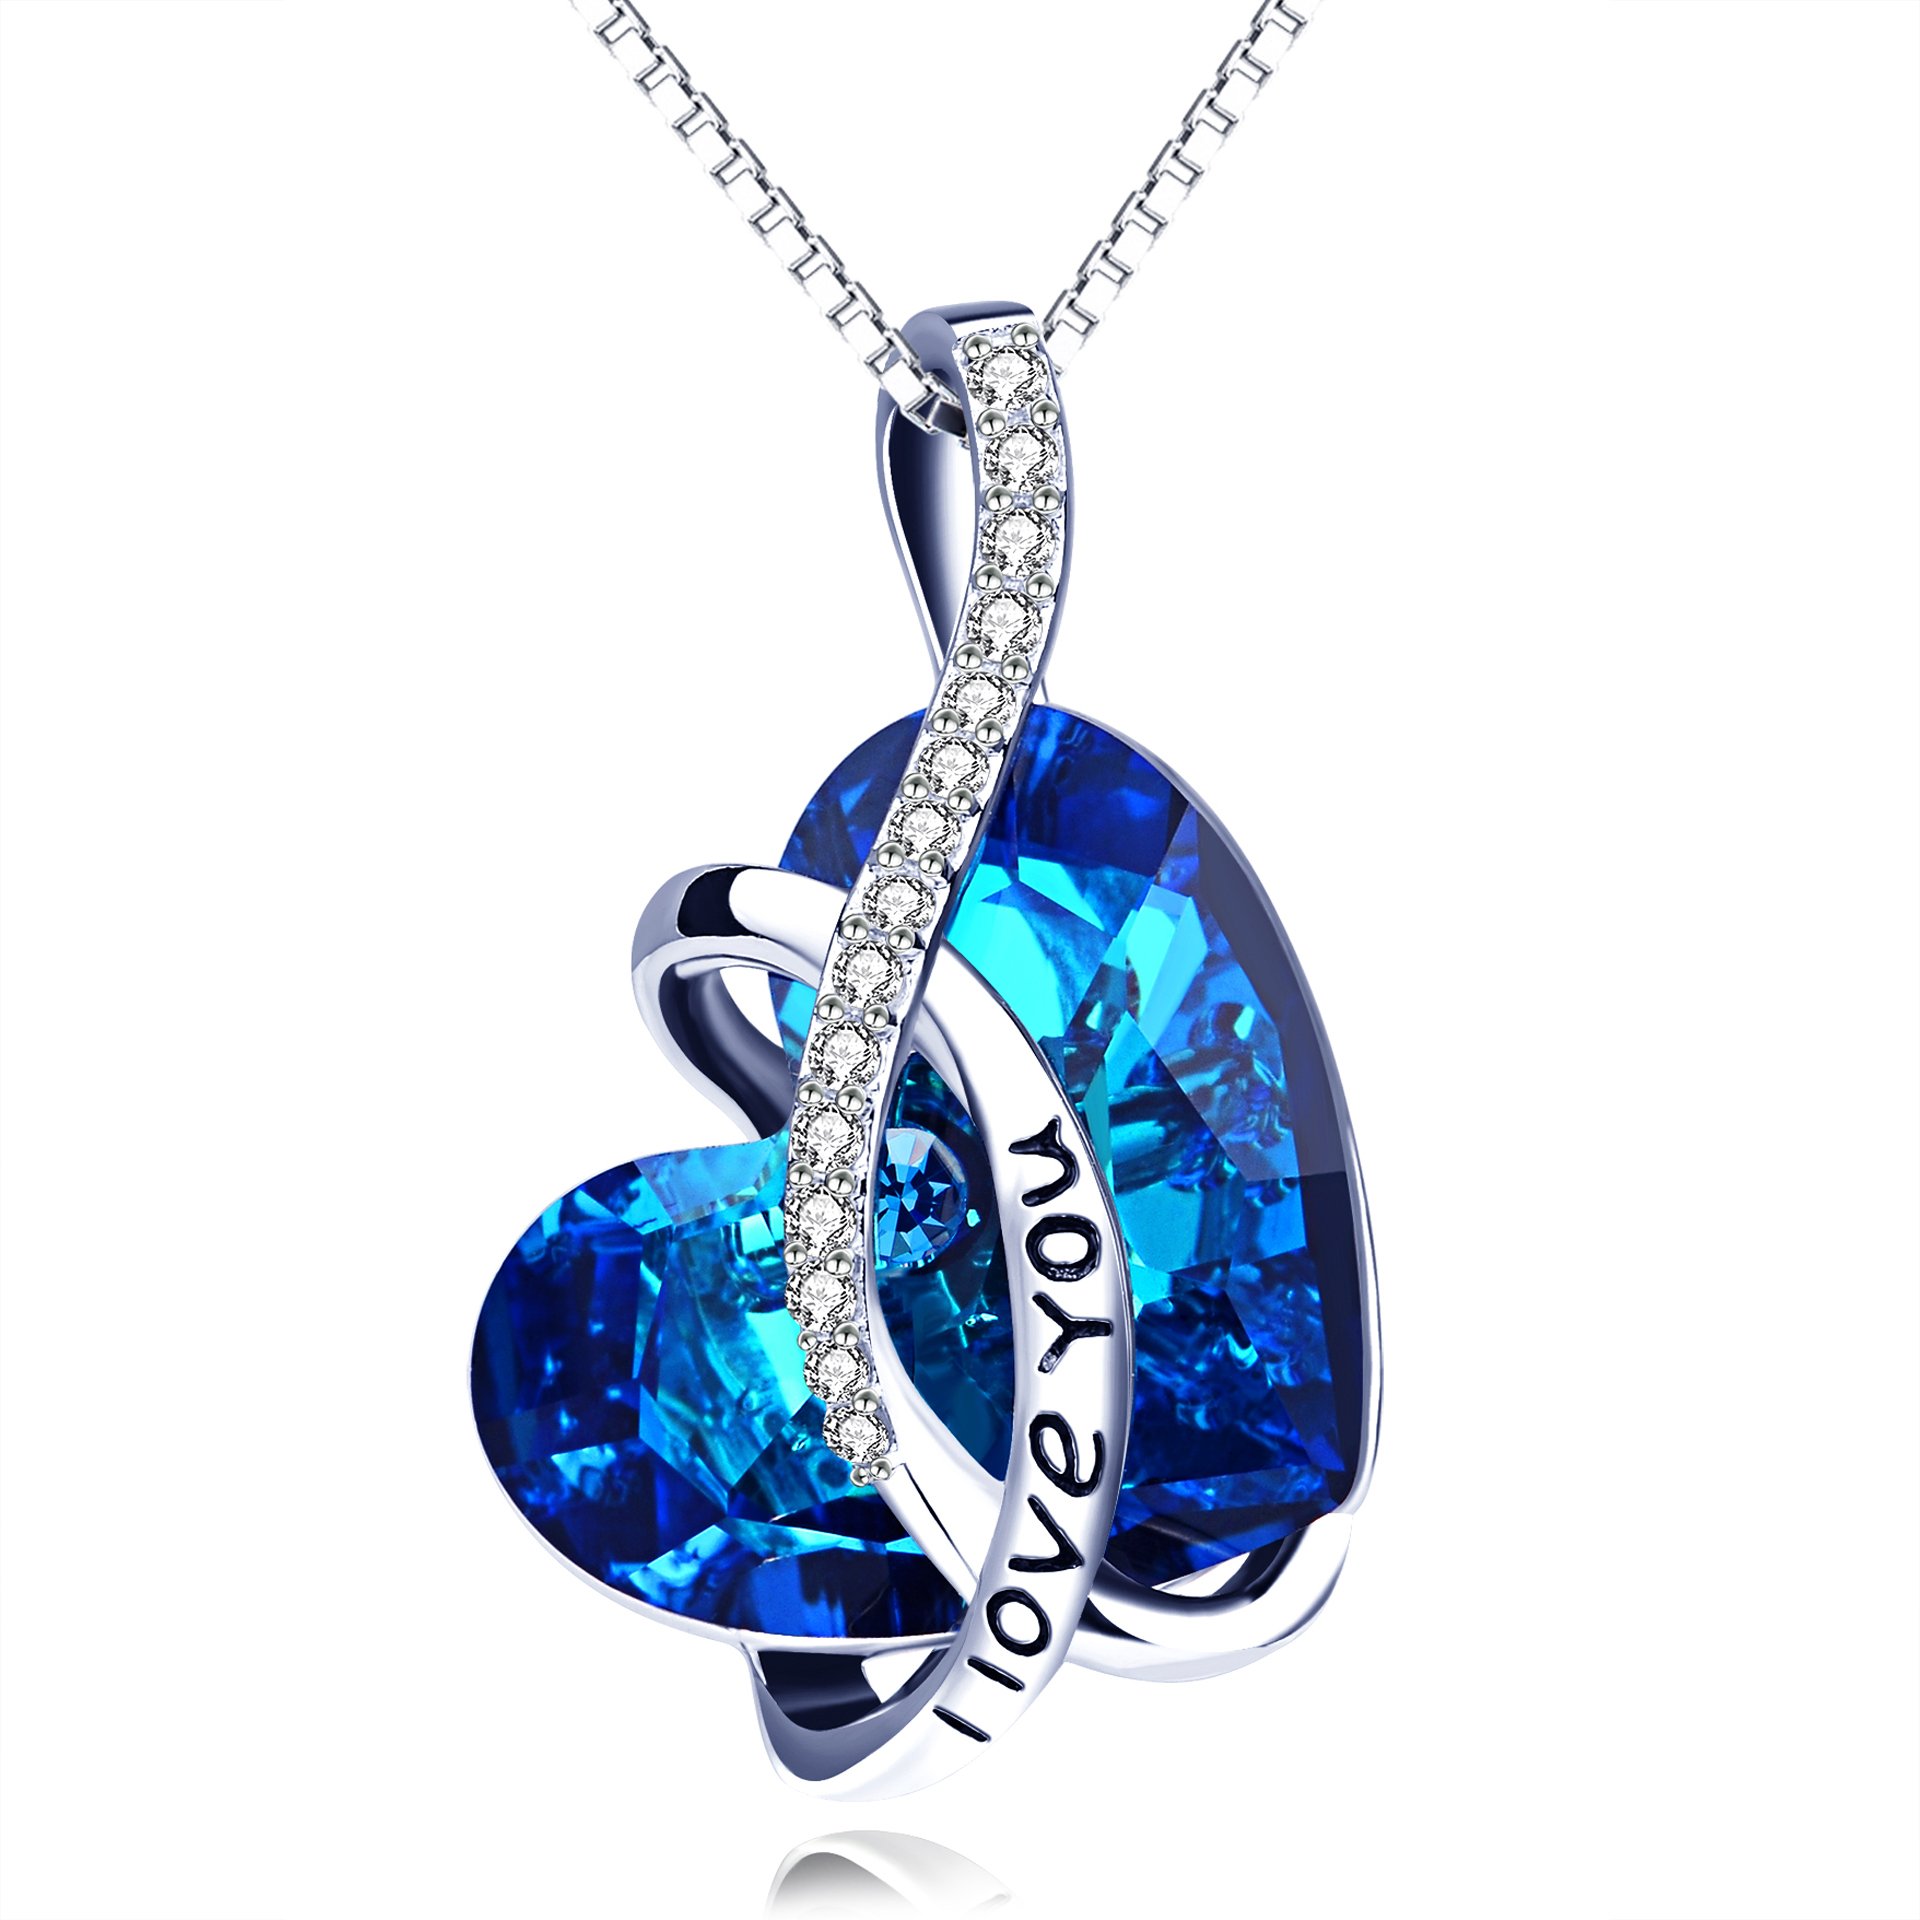 AOBOCO I Love You Sterling Silver 12 Birthstone Heart Pendant Necklace Embellished with Crystals from Austria, Mother's Day Anniversary Birthday Jewelry Christmas Gifts for Women Grandma Nana